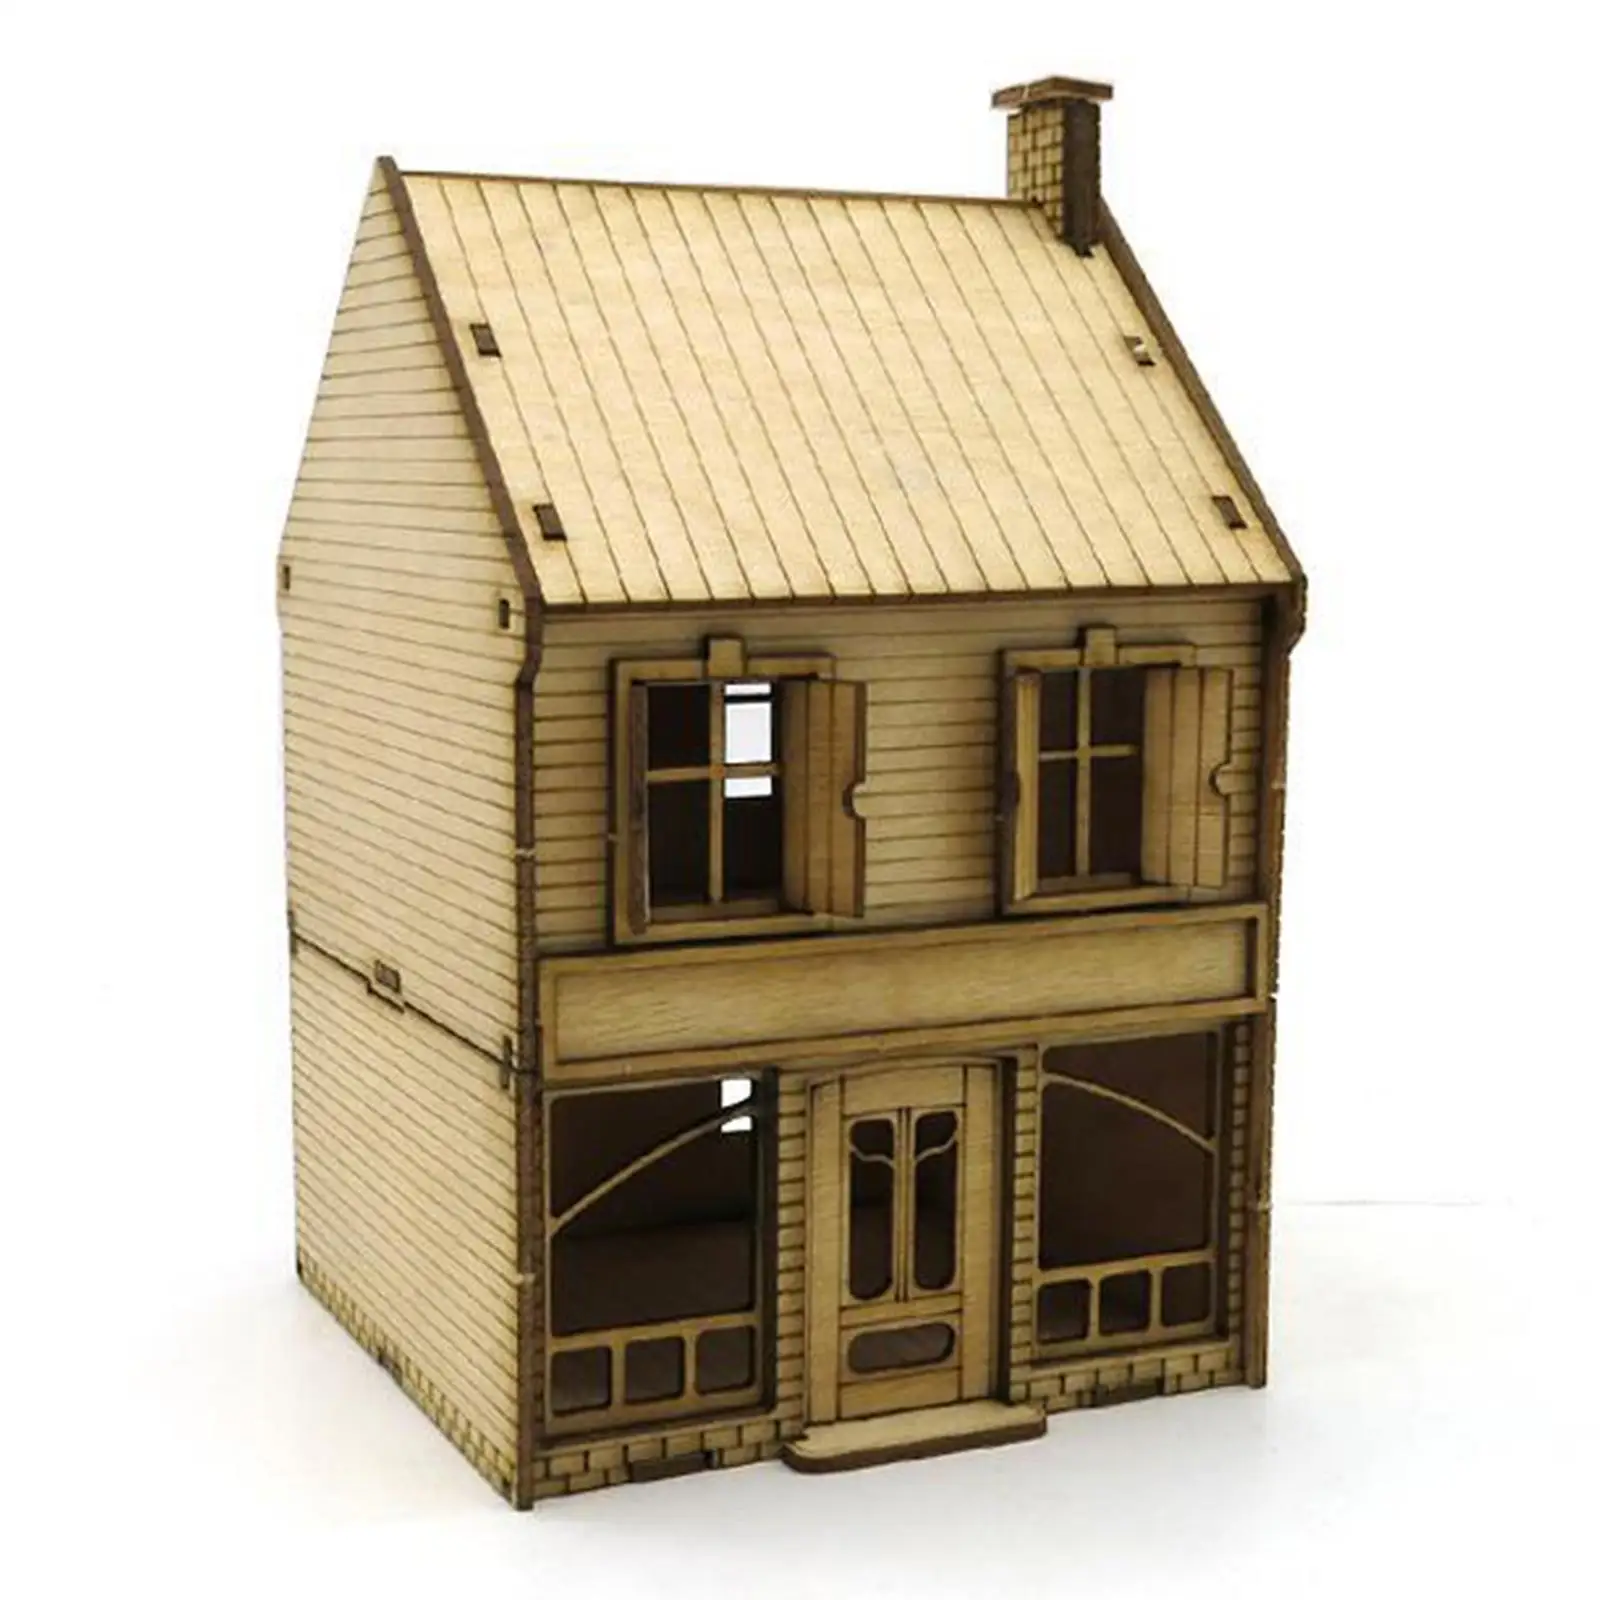 1/72 Wooden 2 Tier European House Unassembly Landscape Building Materials for Sand Table Model Railway Diorama Accessory Layout